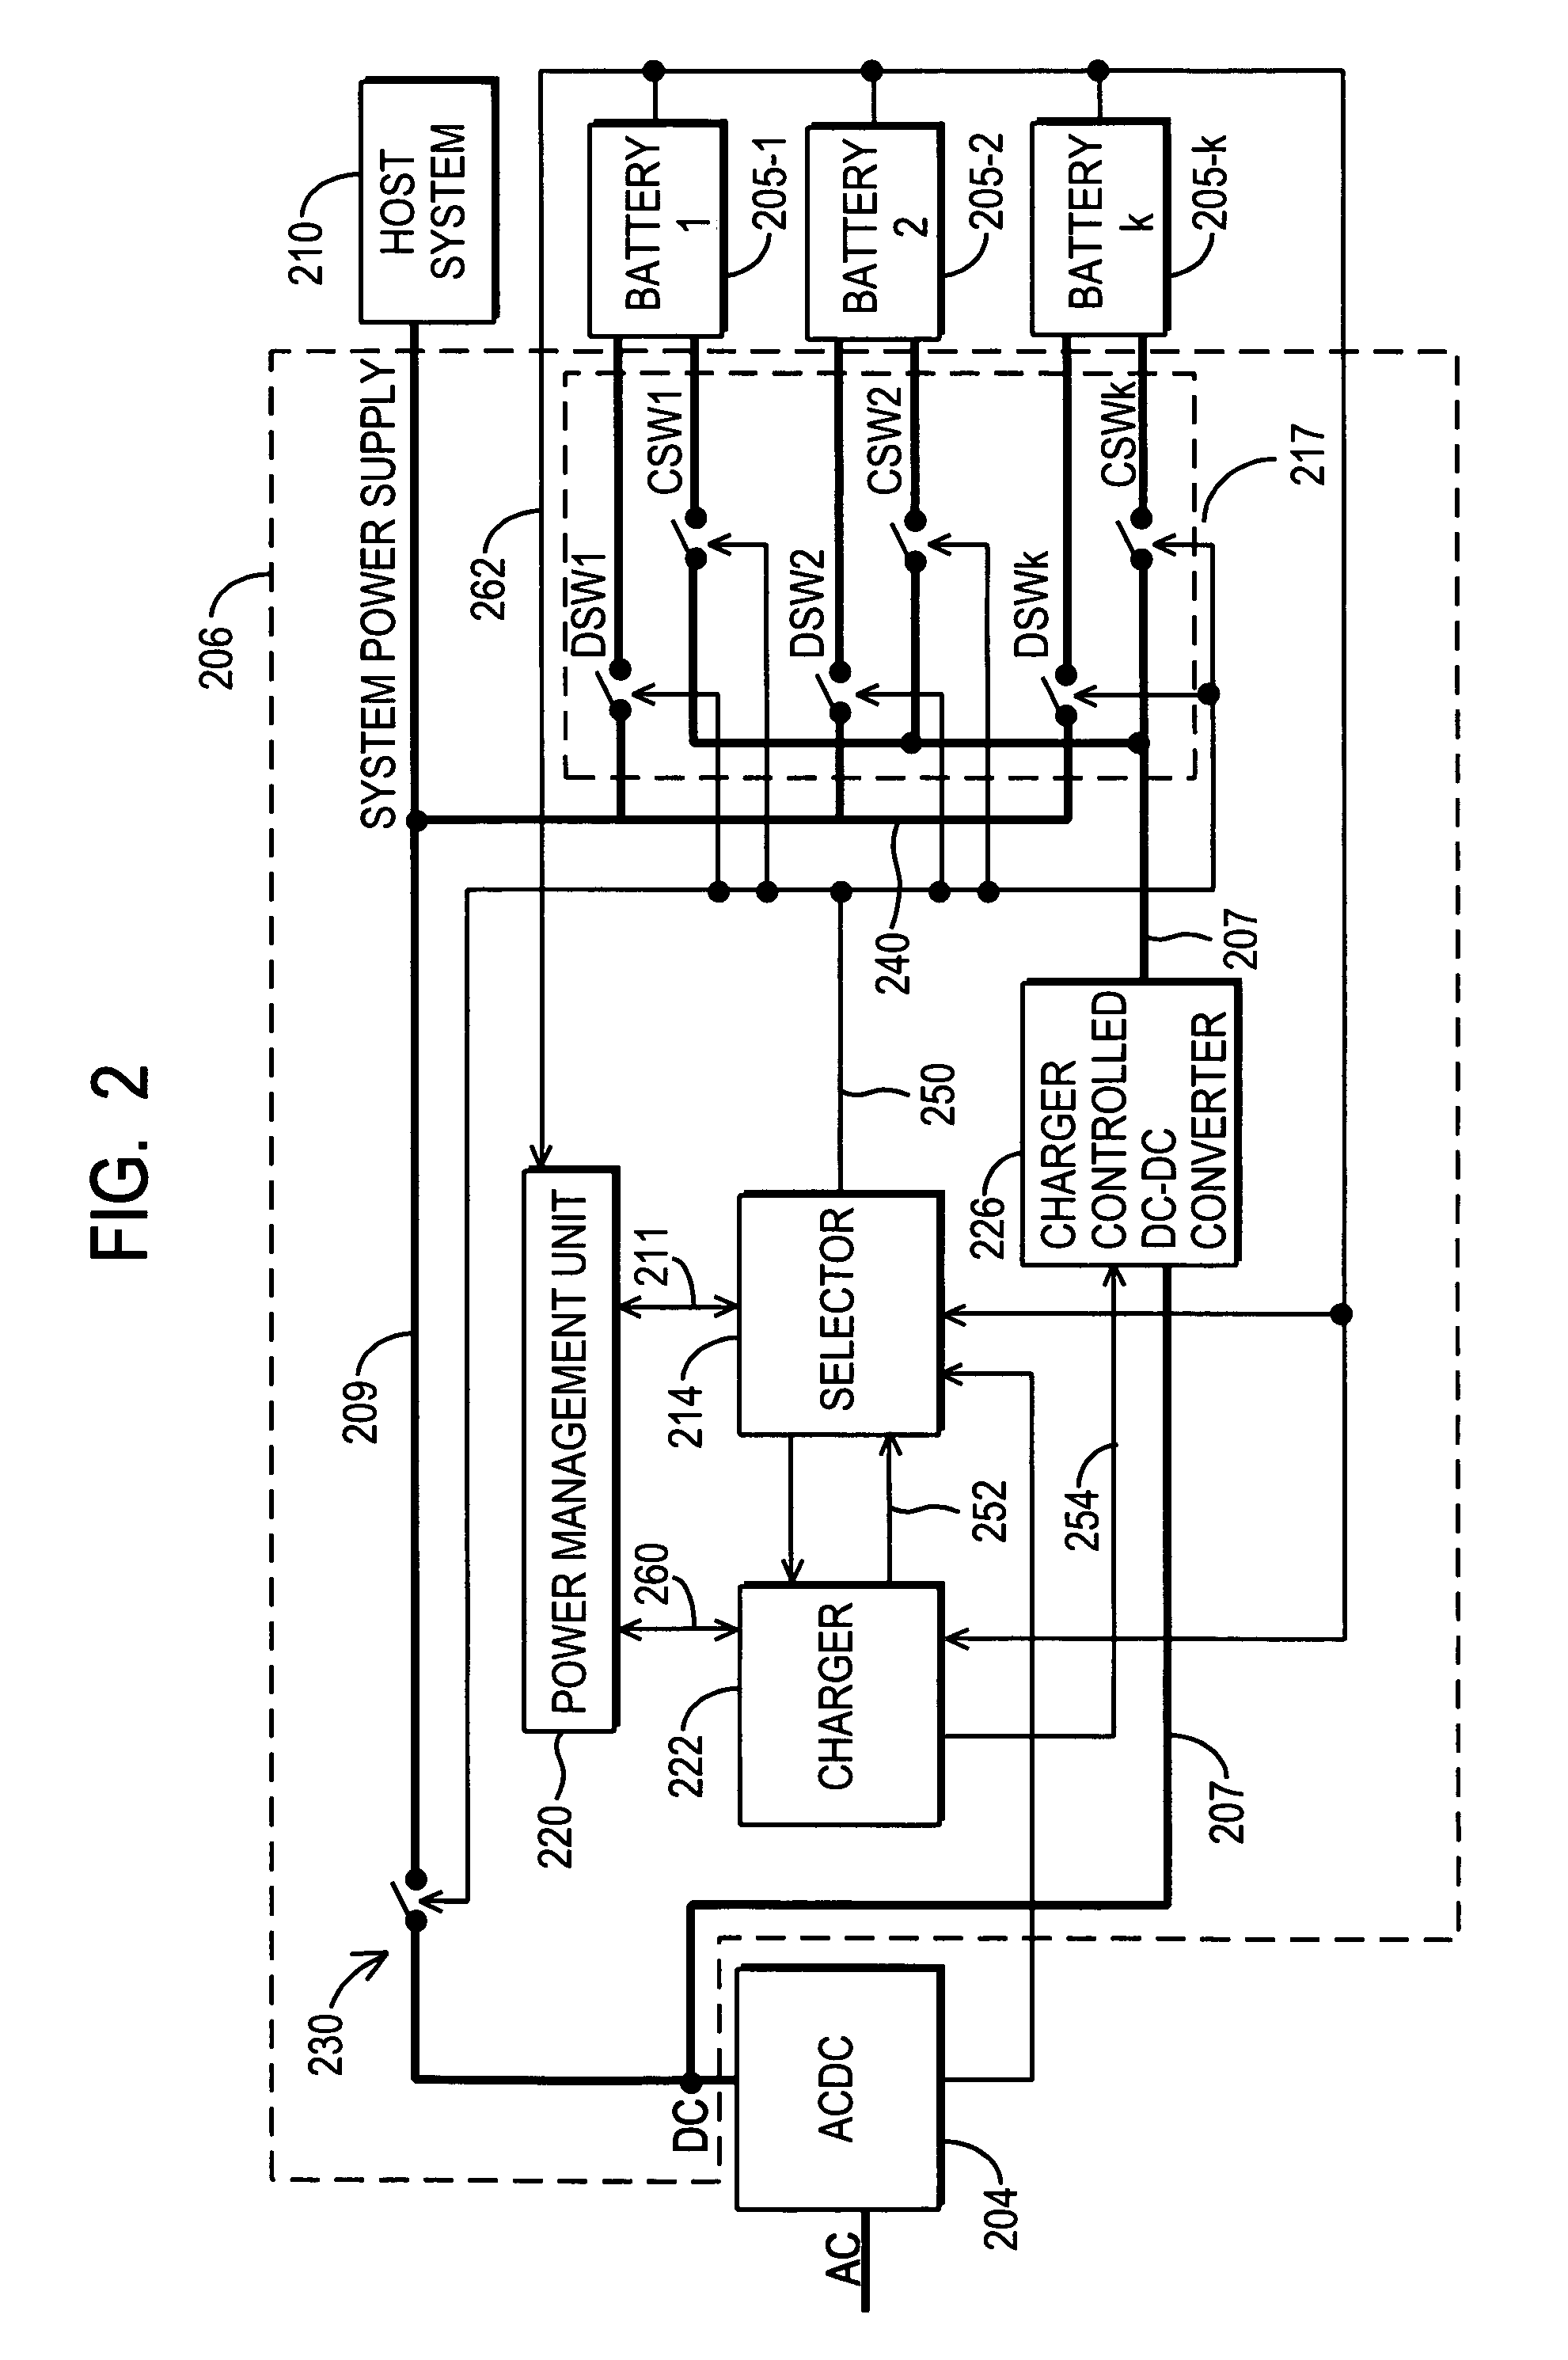 Charging circuit for parallel charging in multiple battery systems